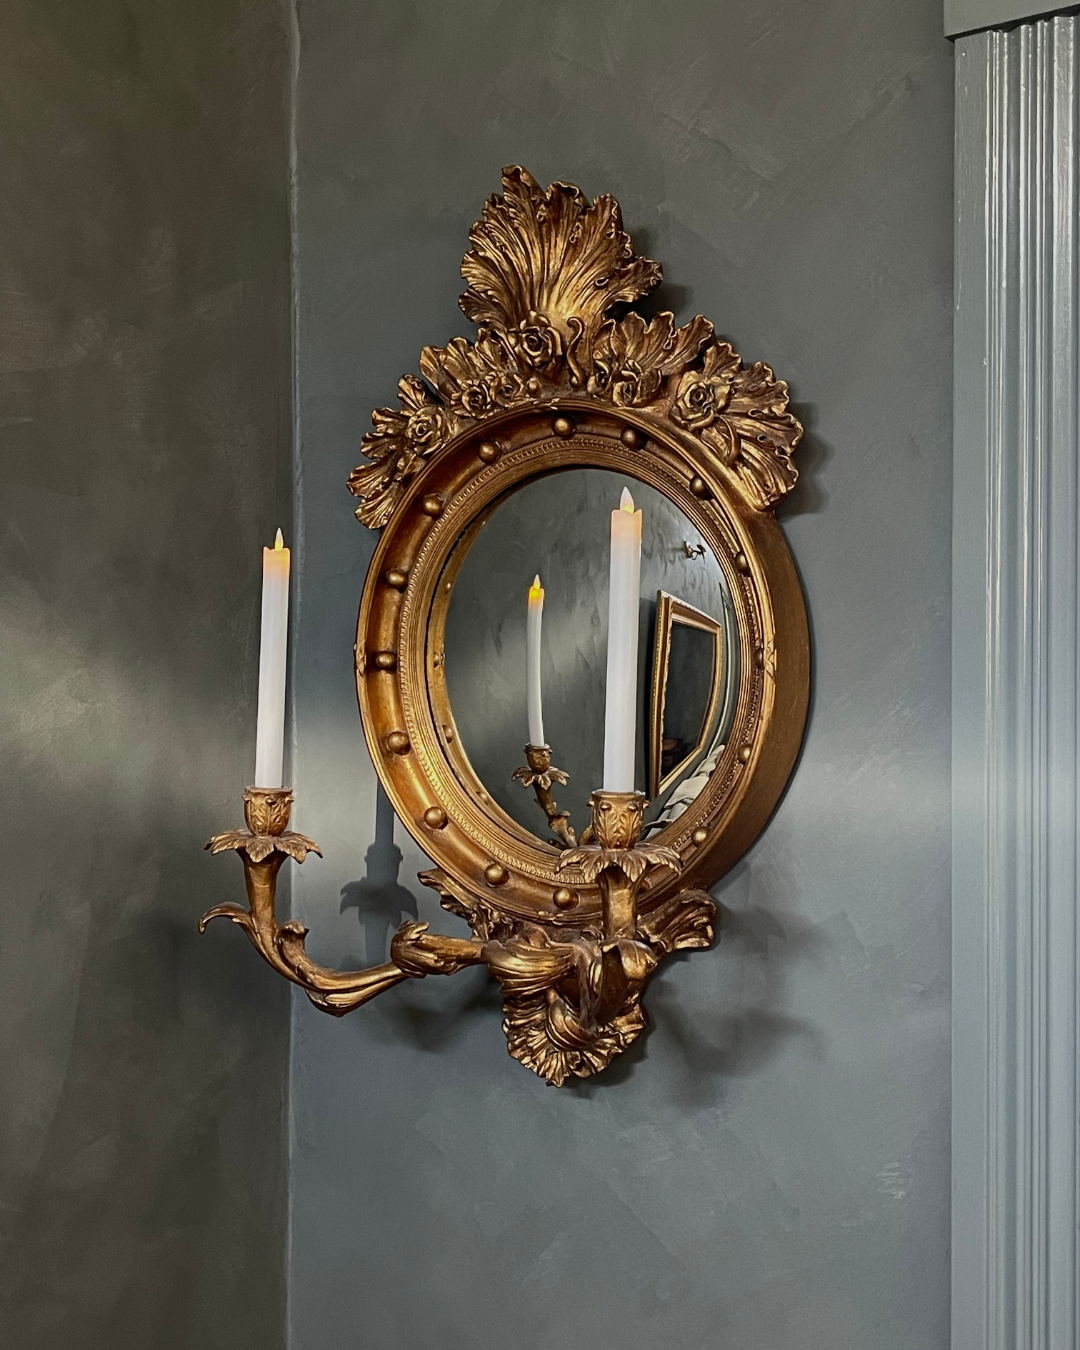 A photo capturing one of the gilded Girandole mirrors that Kim sourced through estate sale.